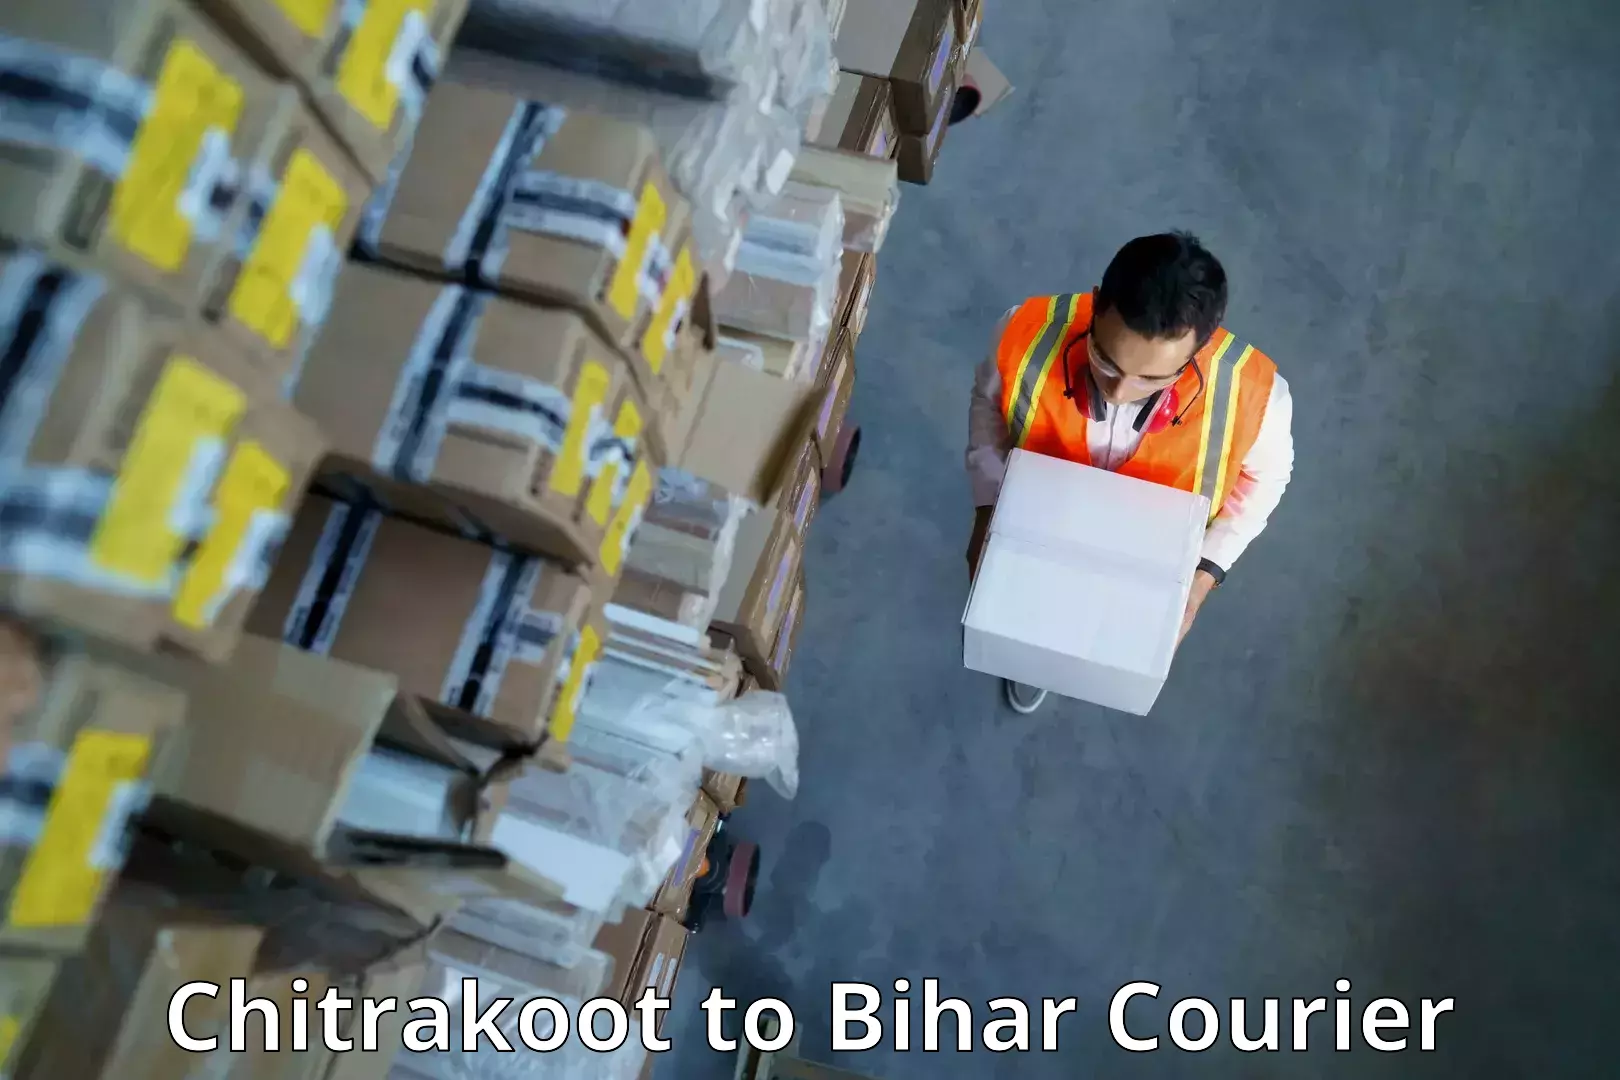 Courier service booking Chitrakoot to Bihar